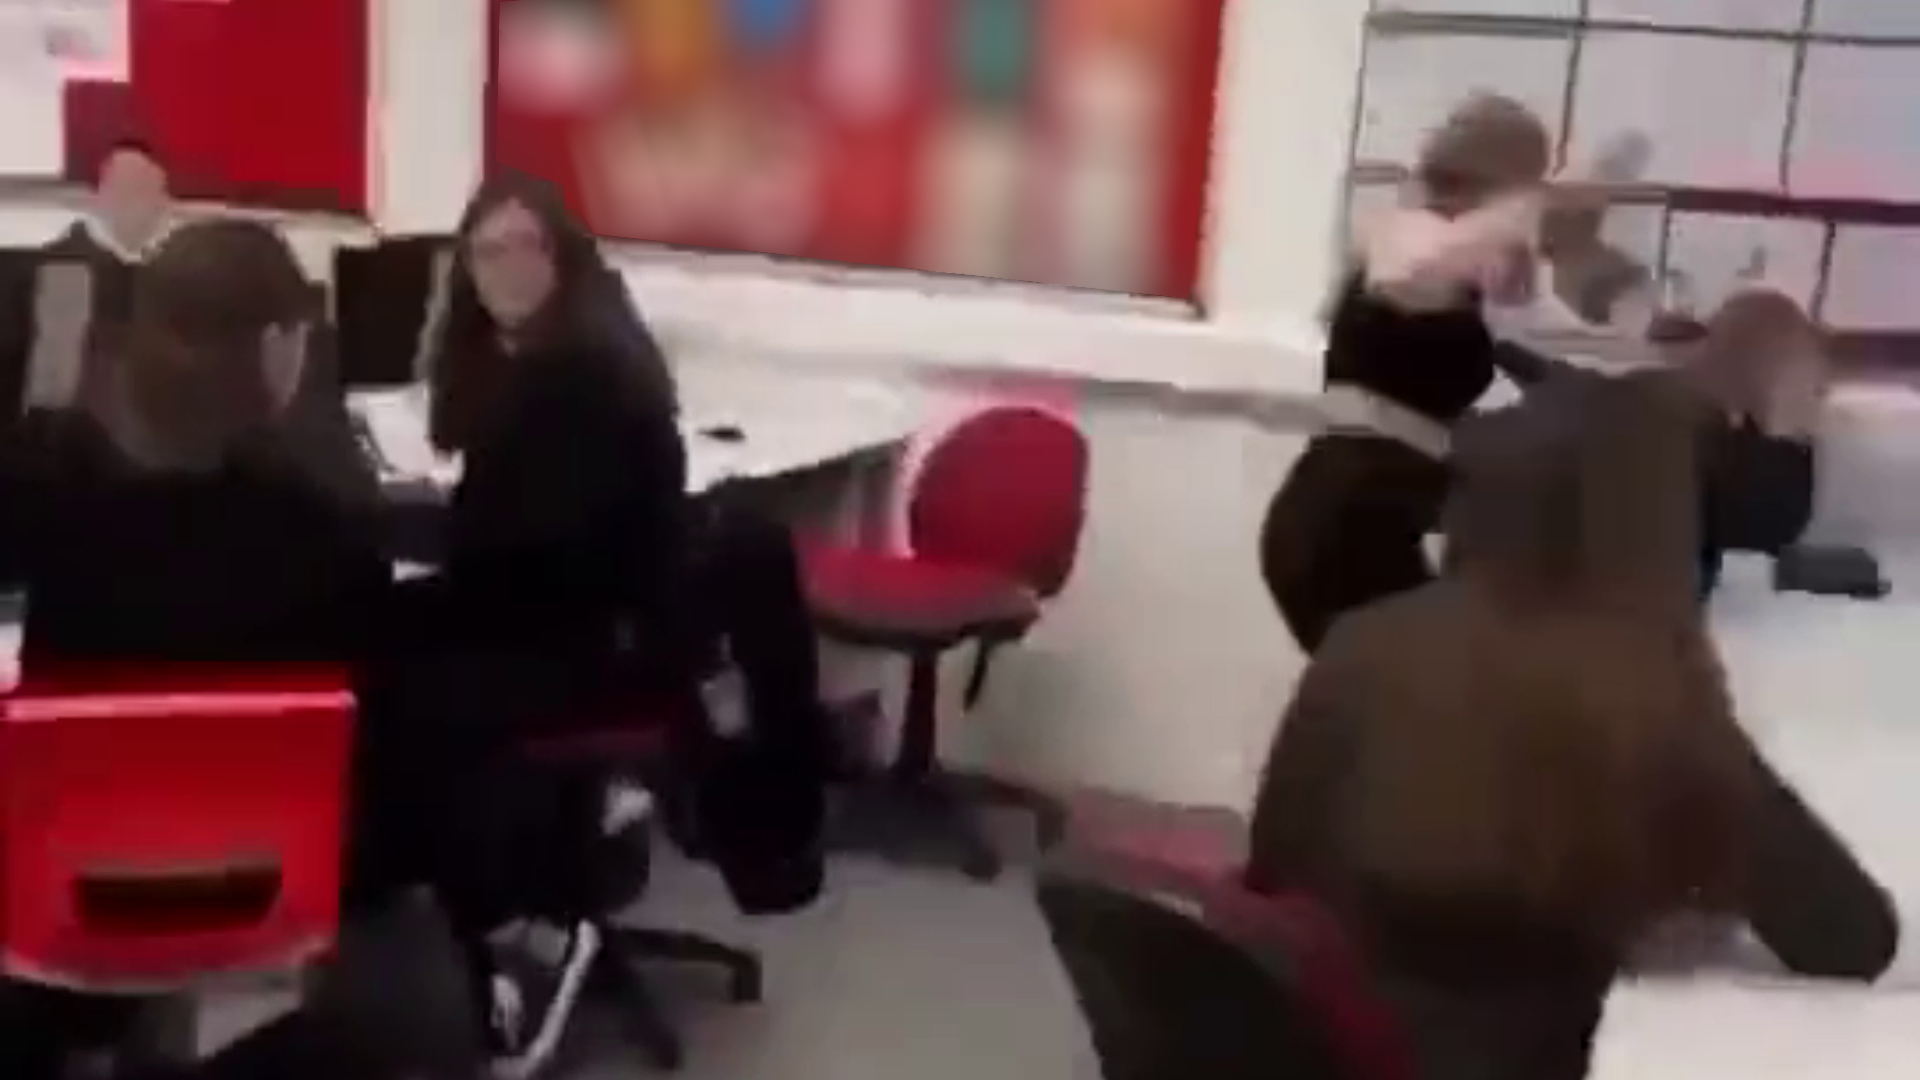 A clip shared widely on social media showed an altercation between two students.